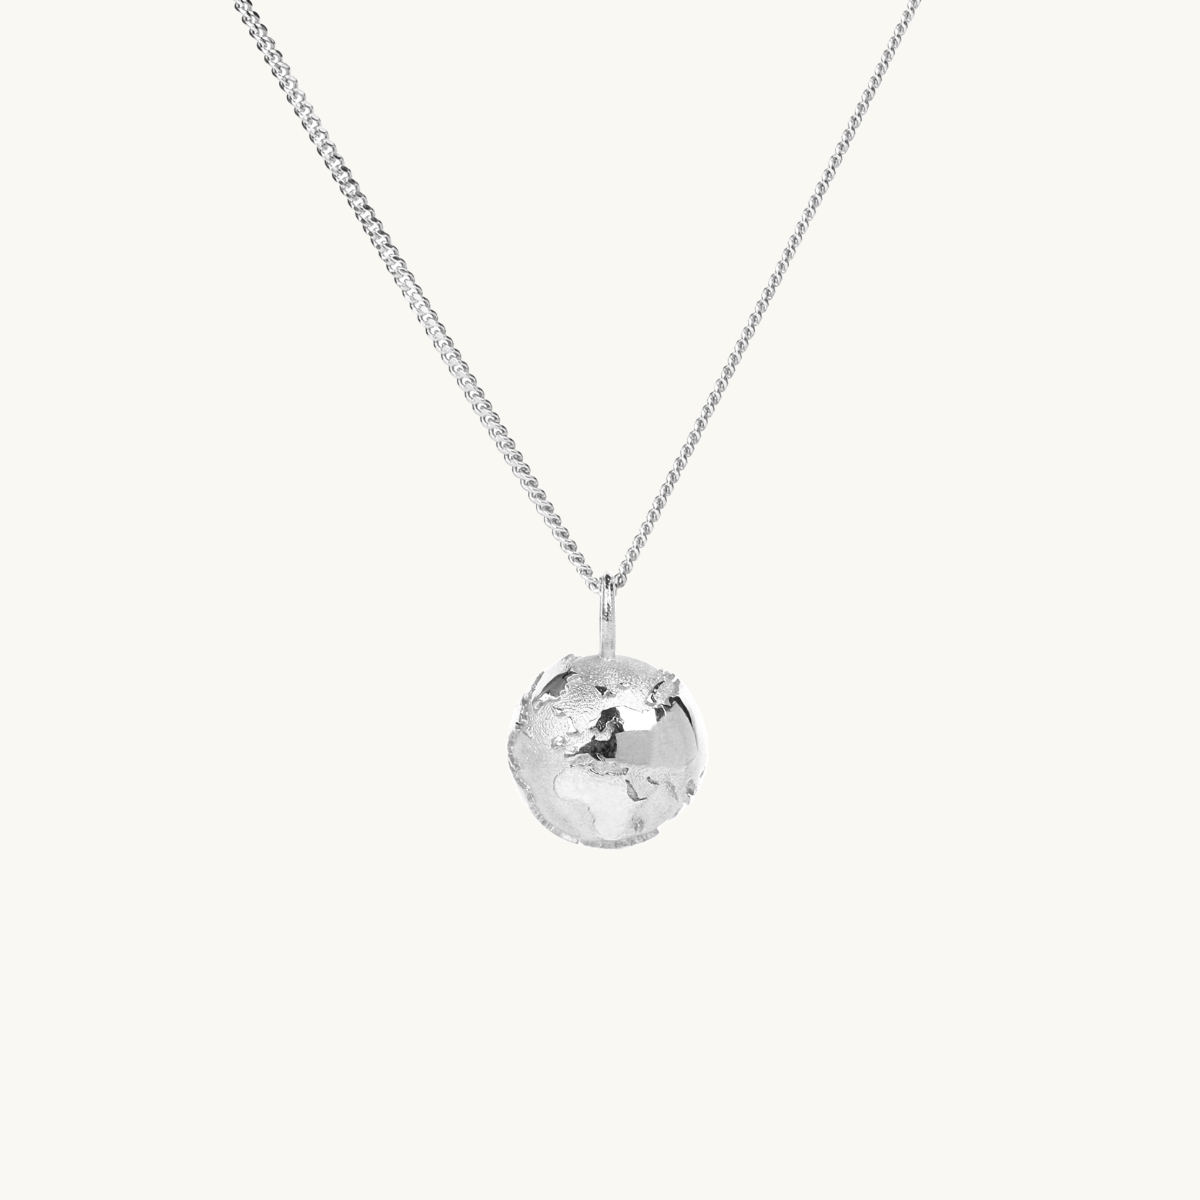 A necklace with a pendant in shape of the earth in silver